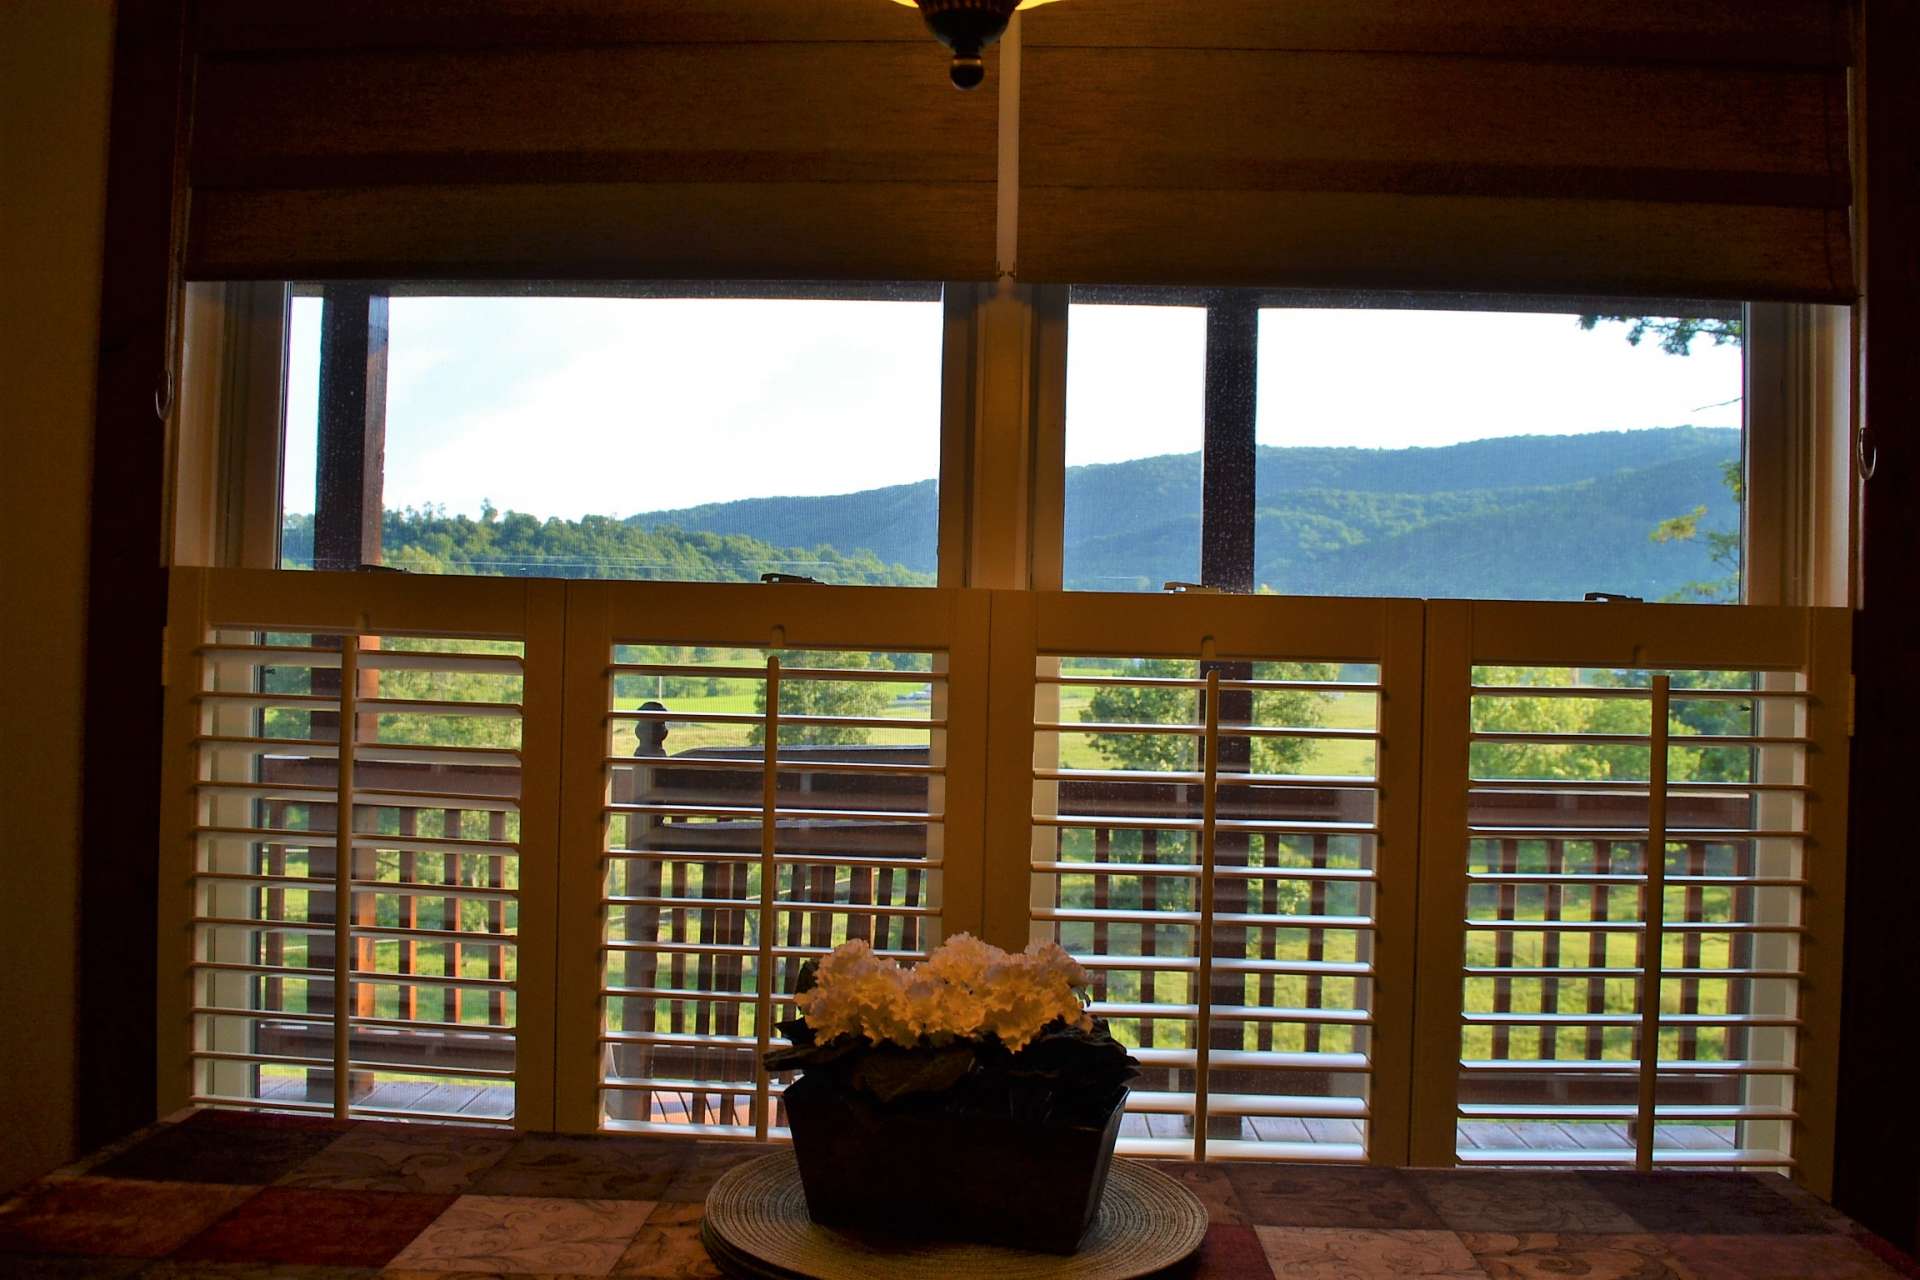 Lots of windows provide access to the views while dining indoors.